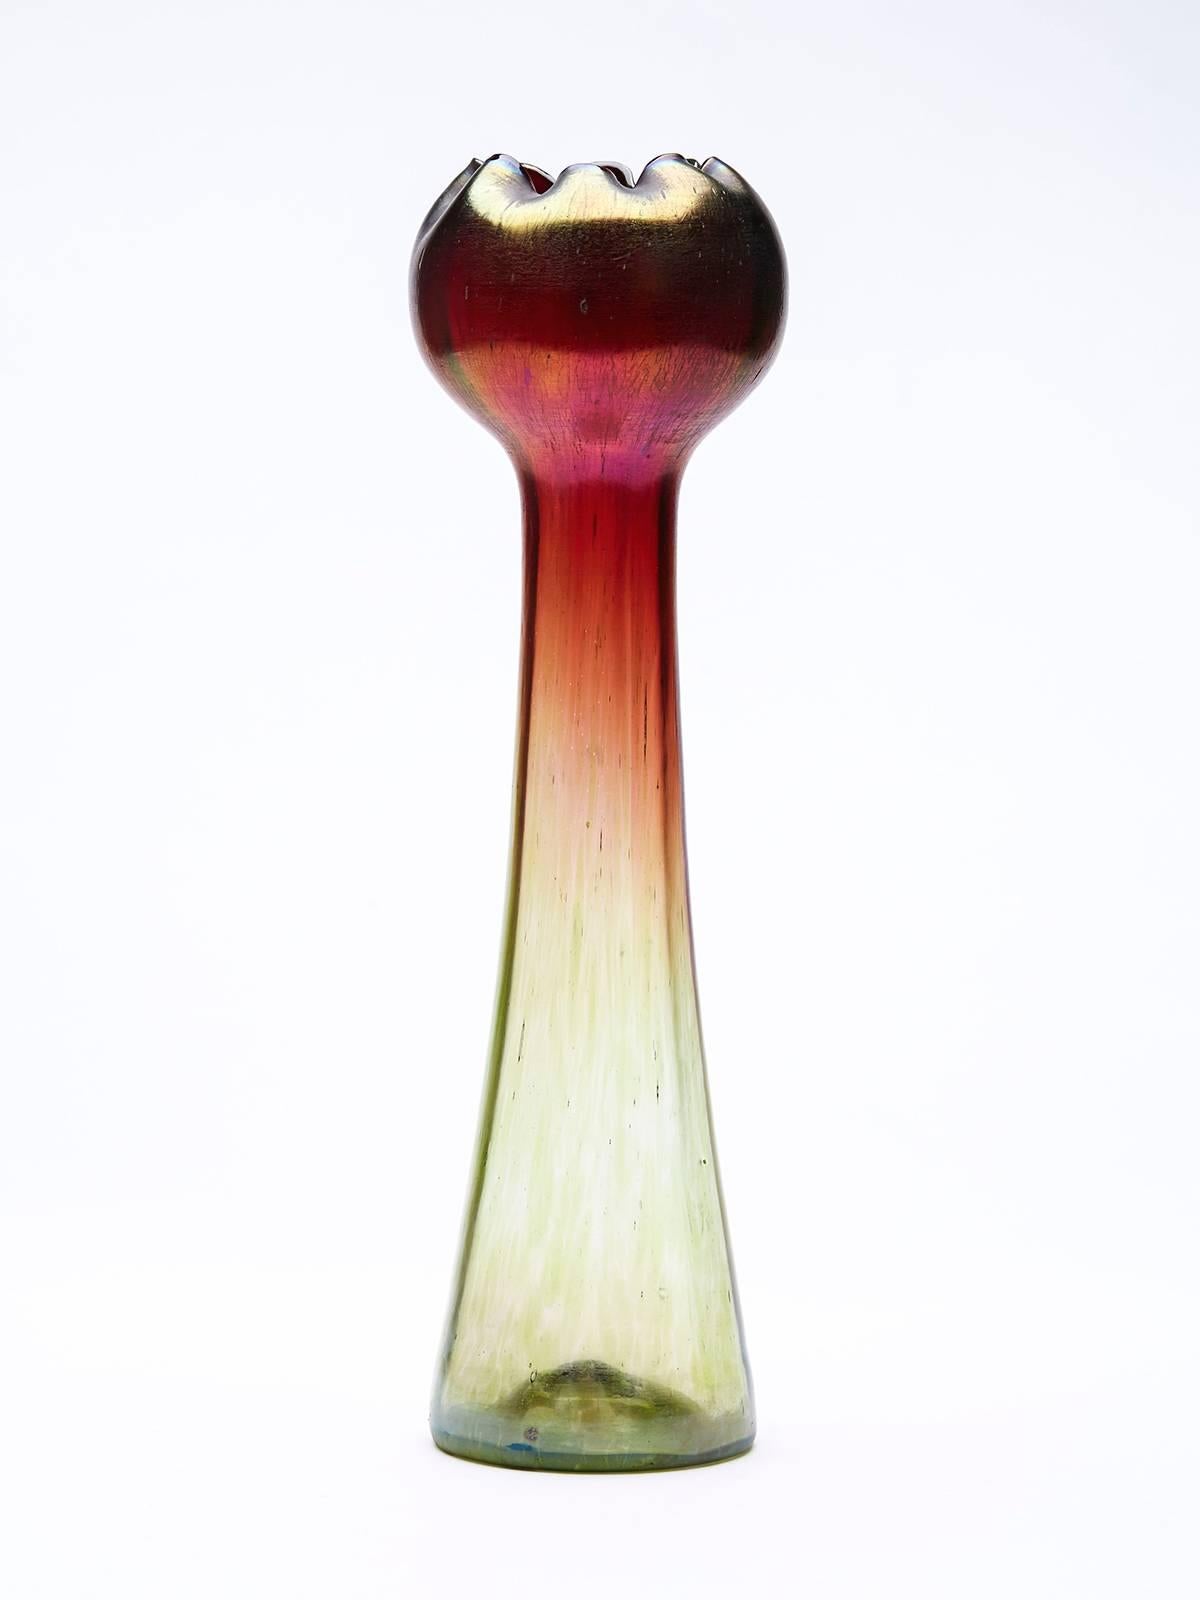 An Art Nouveau tall Bohemian 'Pepita' hyacinth are glass vase by Rindskopf. The vase has a moulded panel body forming a tall stem with a rounded flower or bud shaped top. The vase has a green coloured lower body extending upwards into a wine red